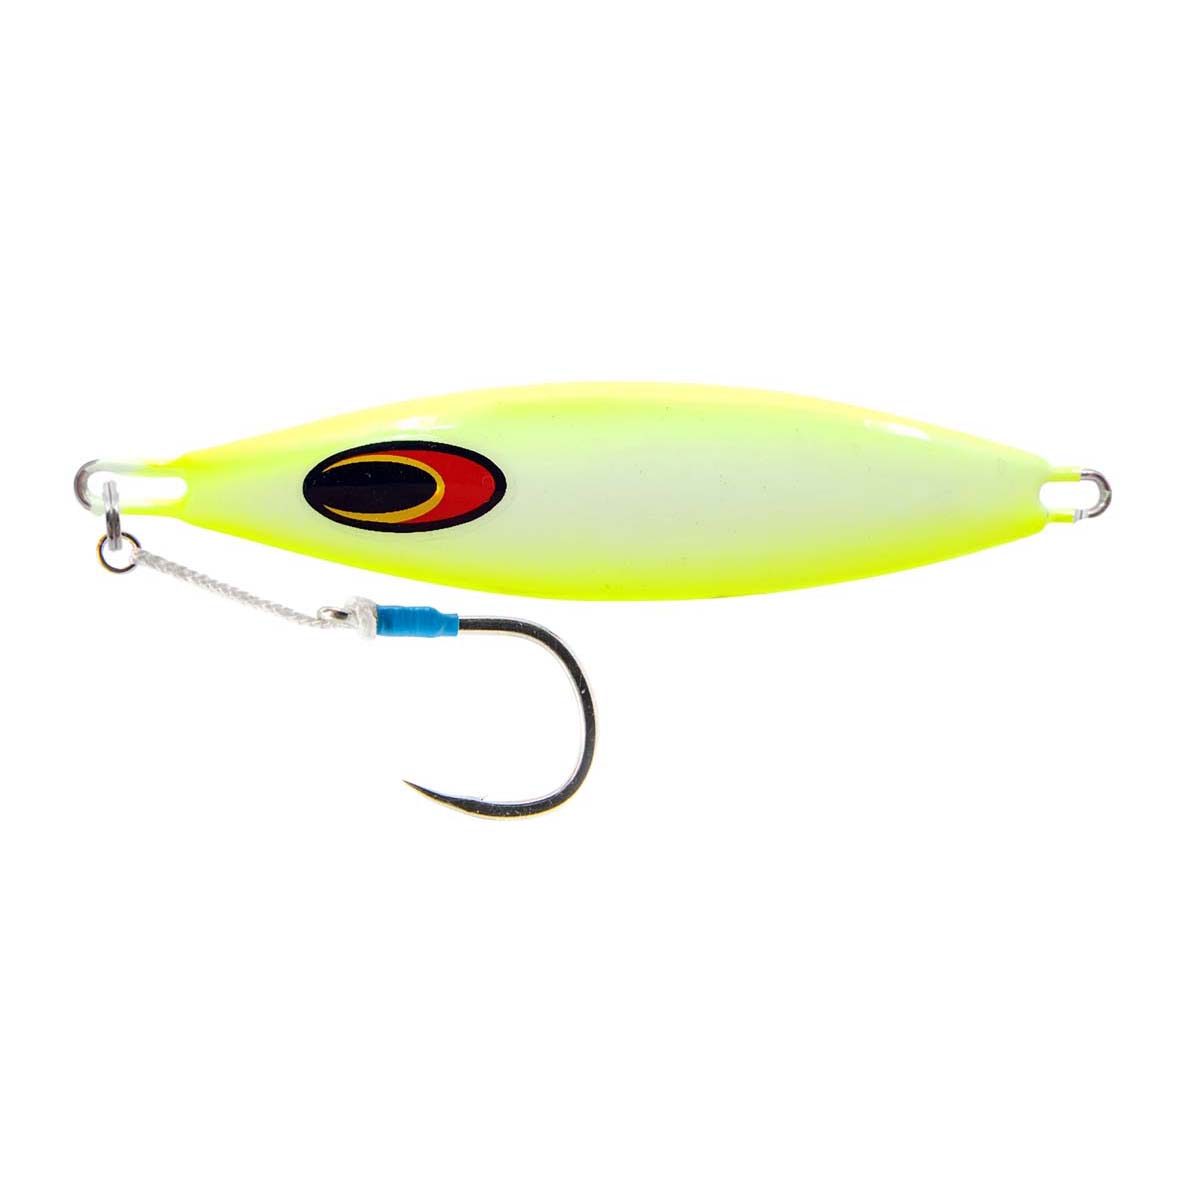 Nomad Buffalo Jig Lure 80g Chartreuse White Glow @ Club BCF